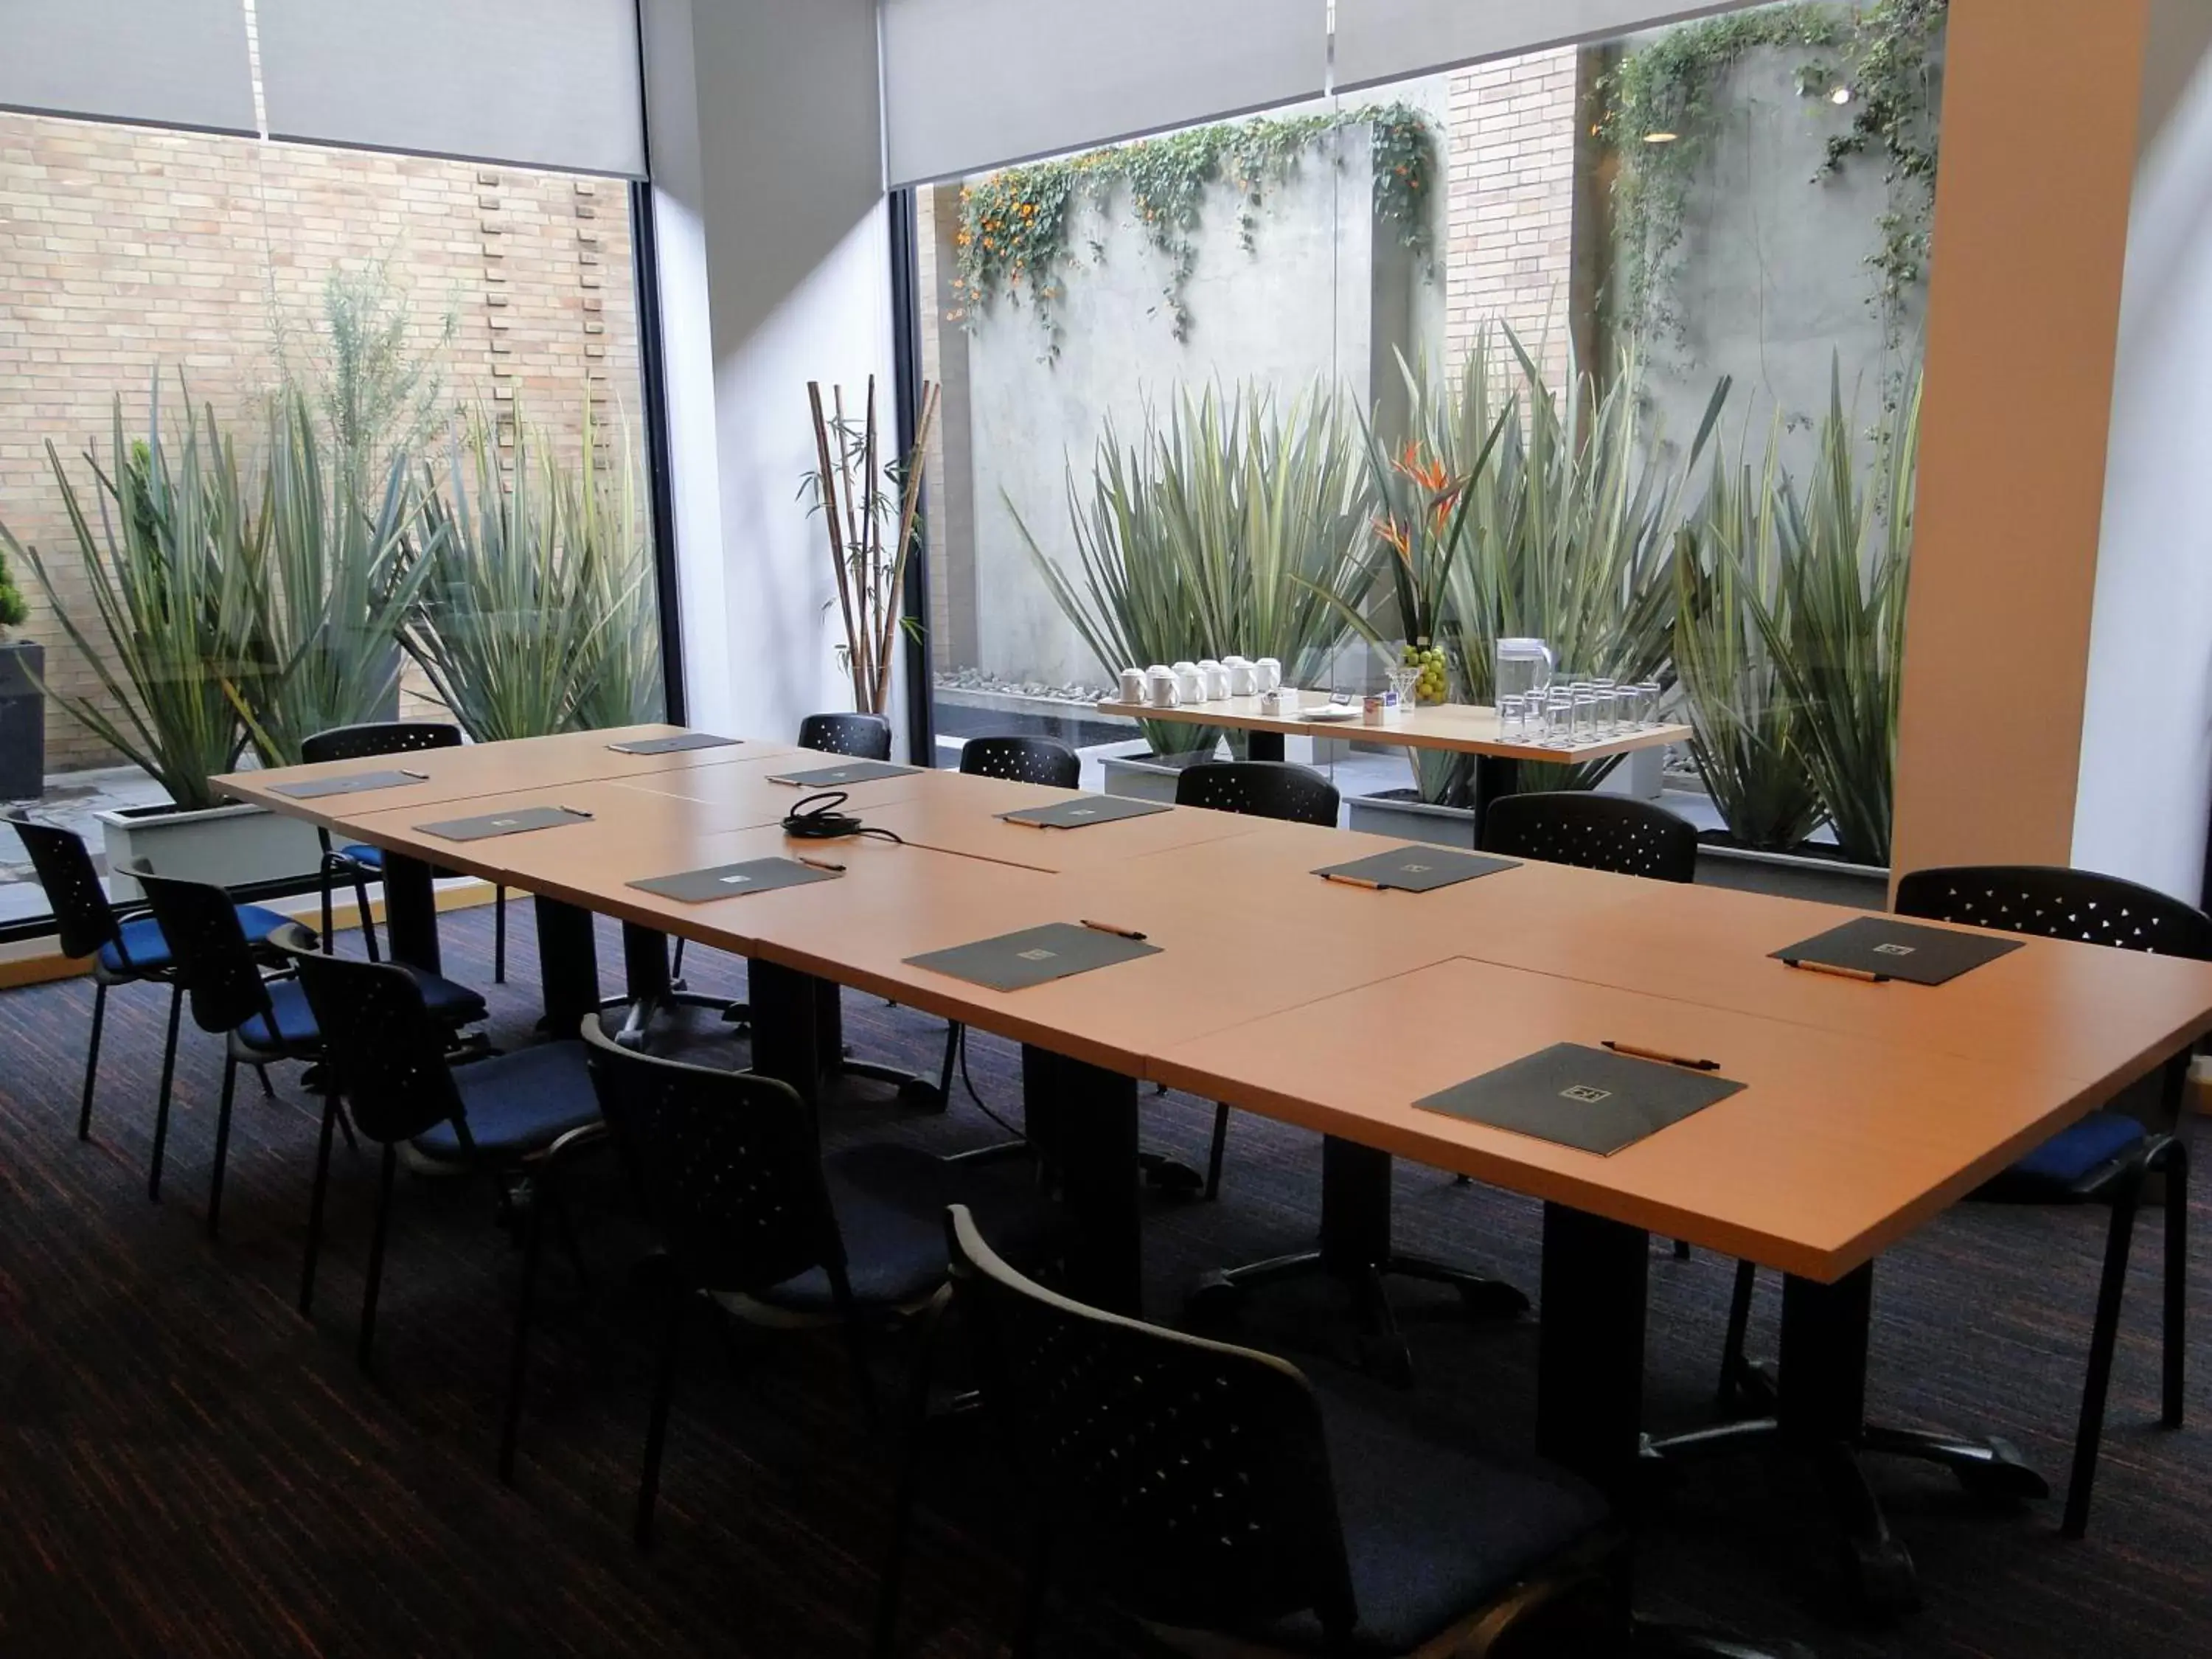 Business facilities in Hotel bh Parque 93